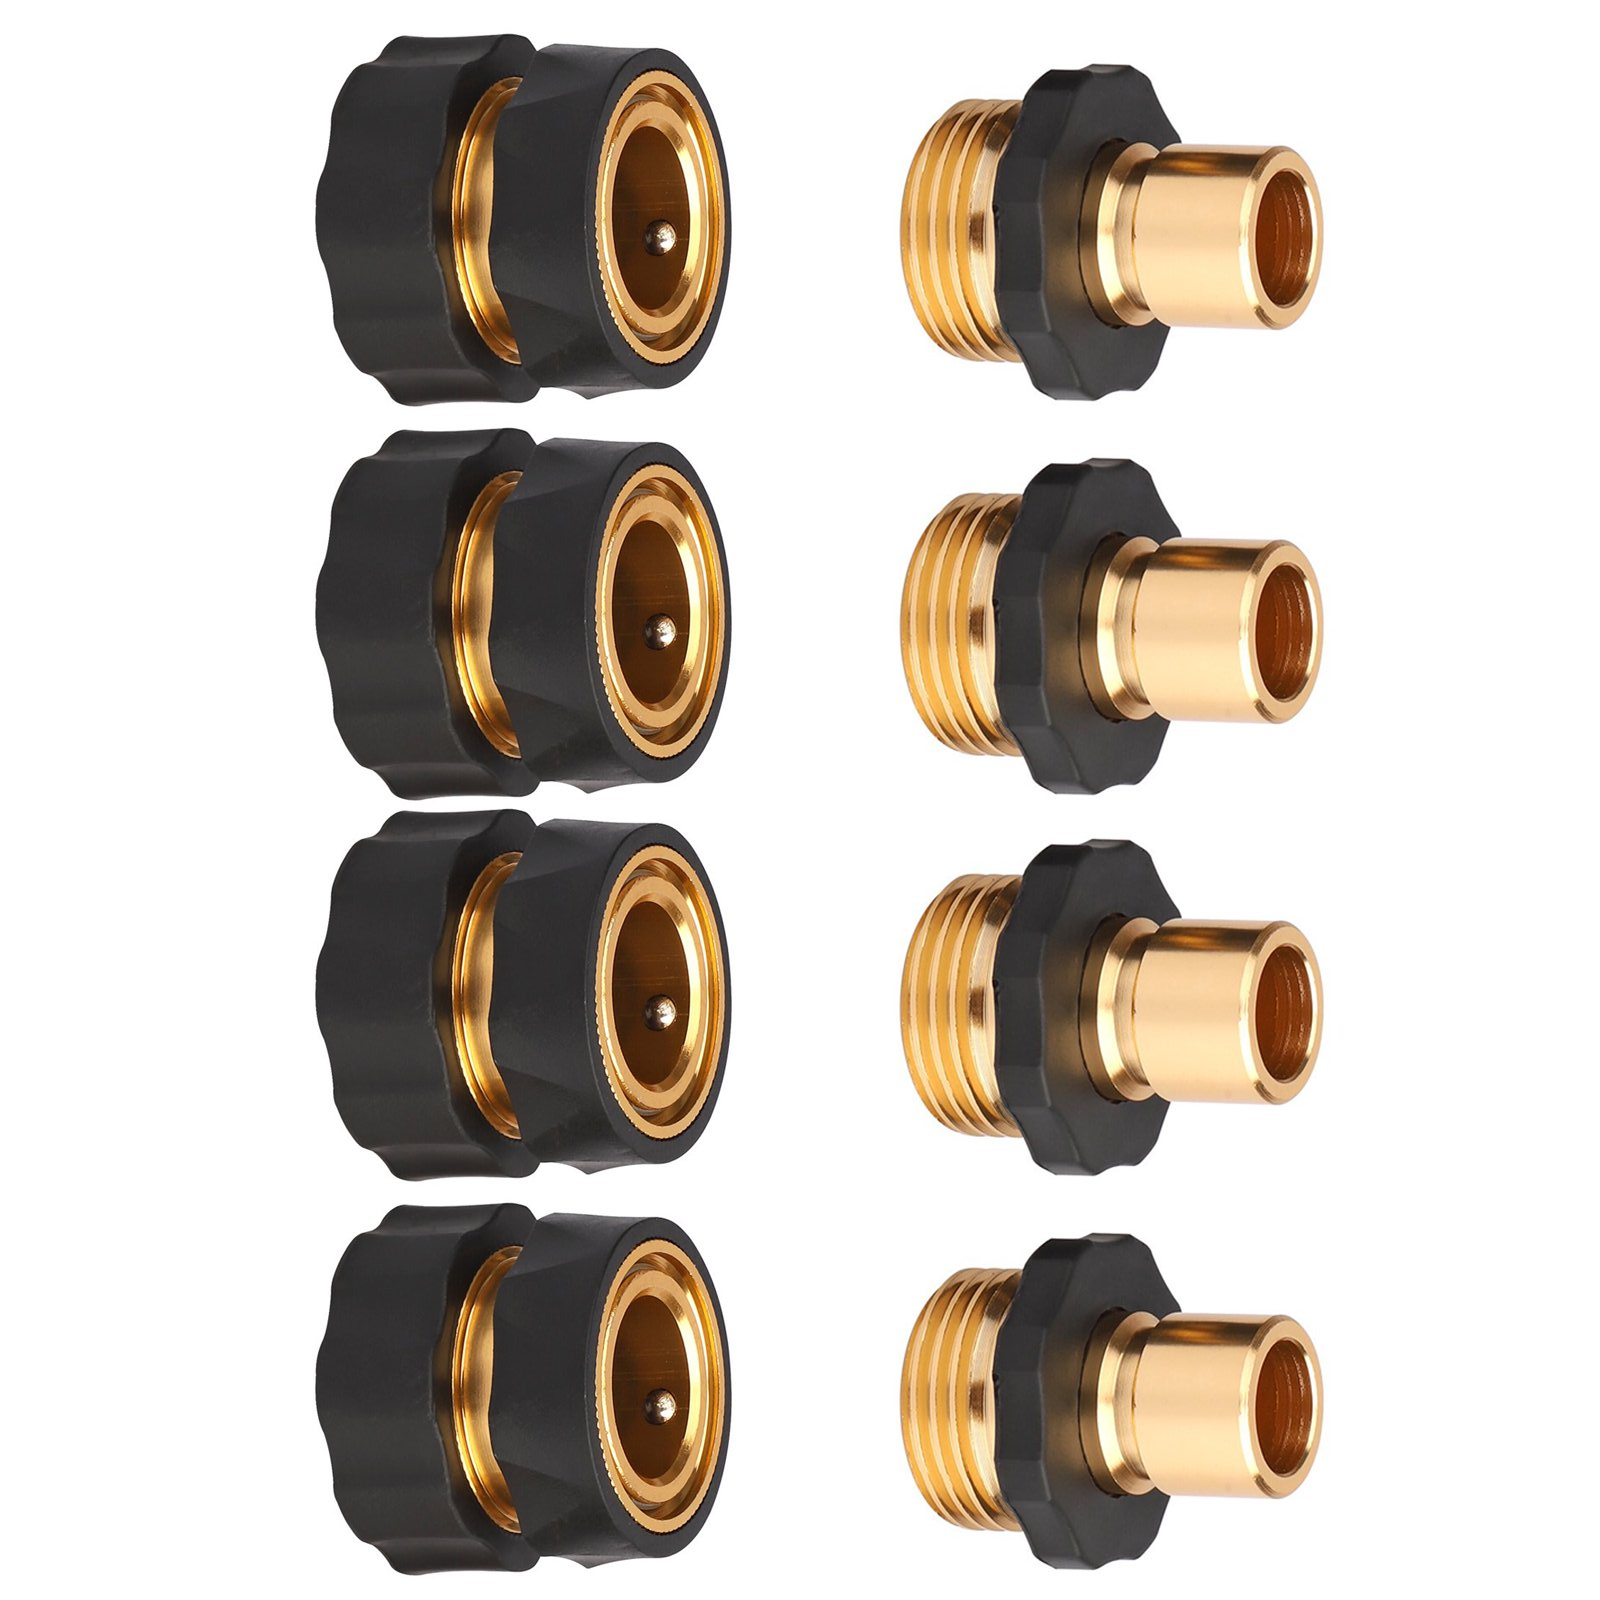 EEEkit 4 Set Male and Female Garden Hose Fitting Quick Connector Set - image 1 of 8